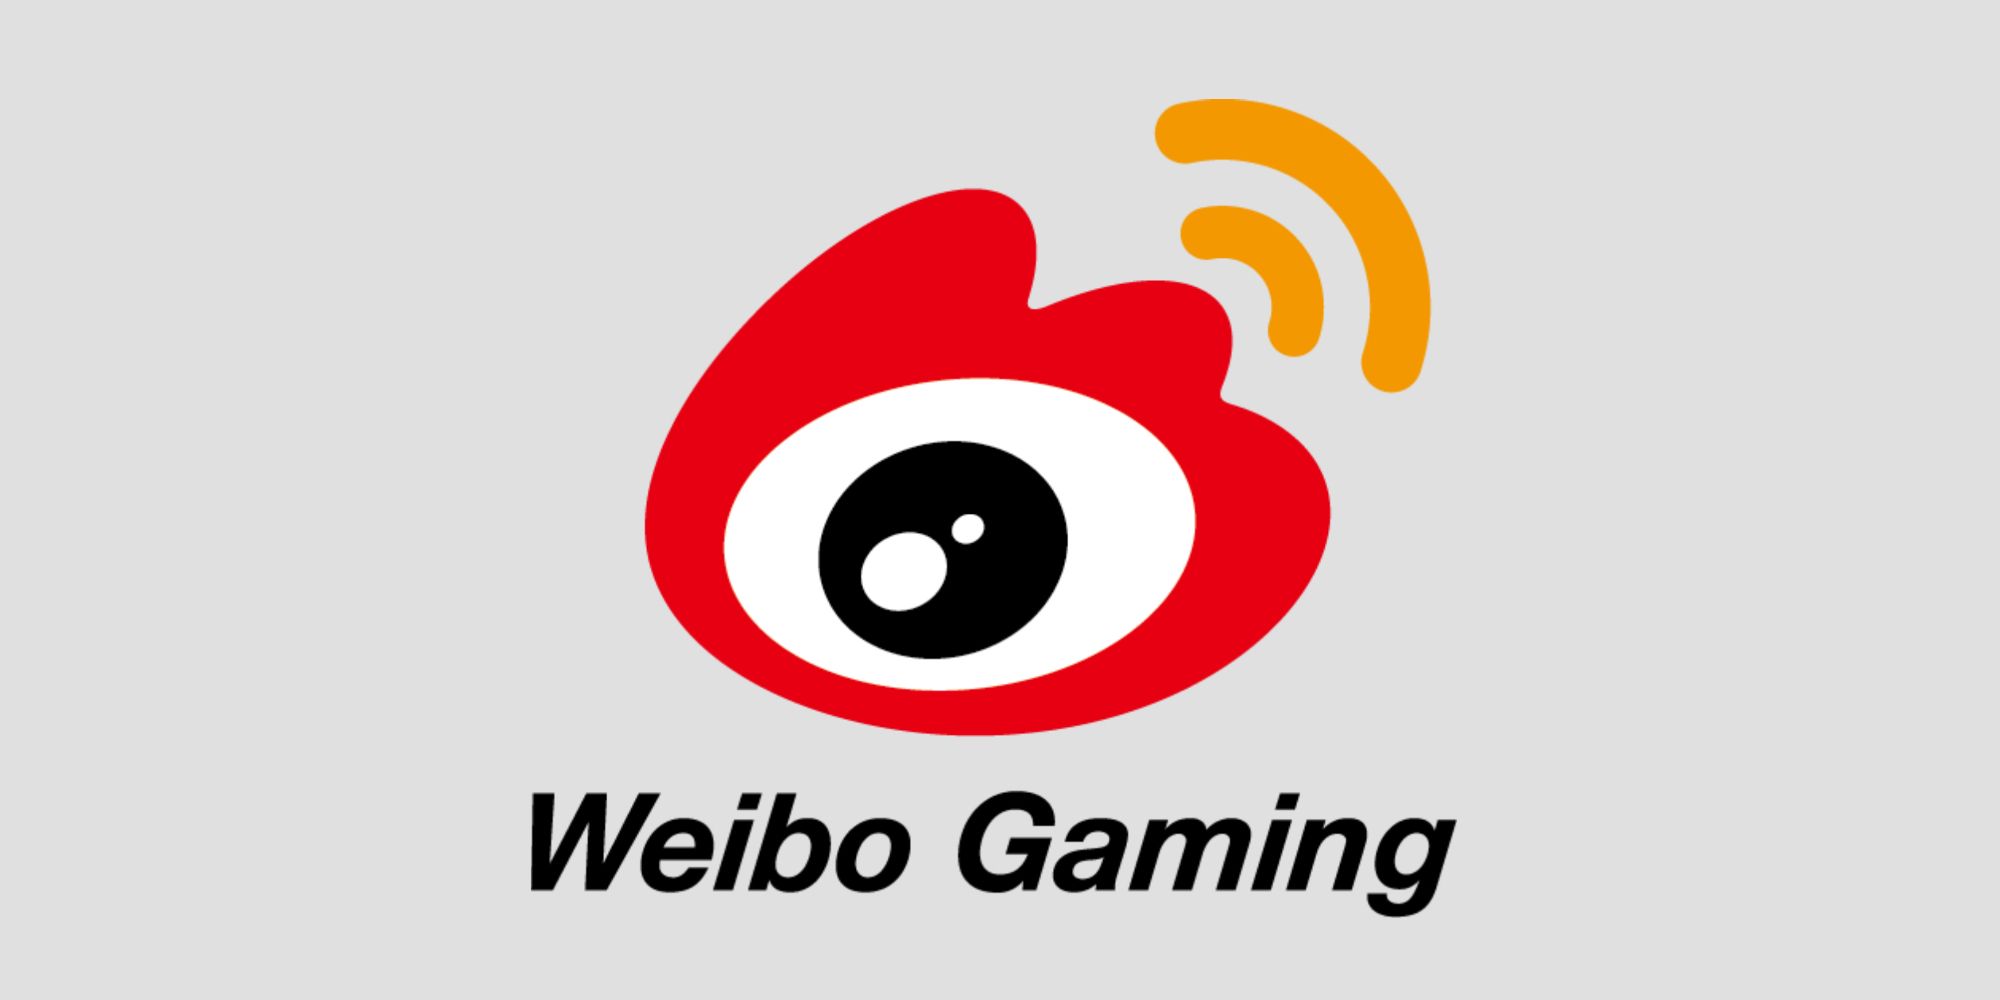 League of Legends Weibo Gaming